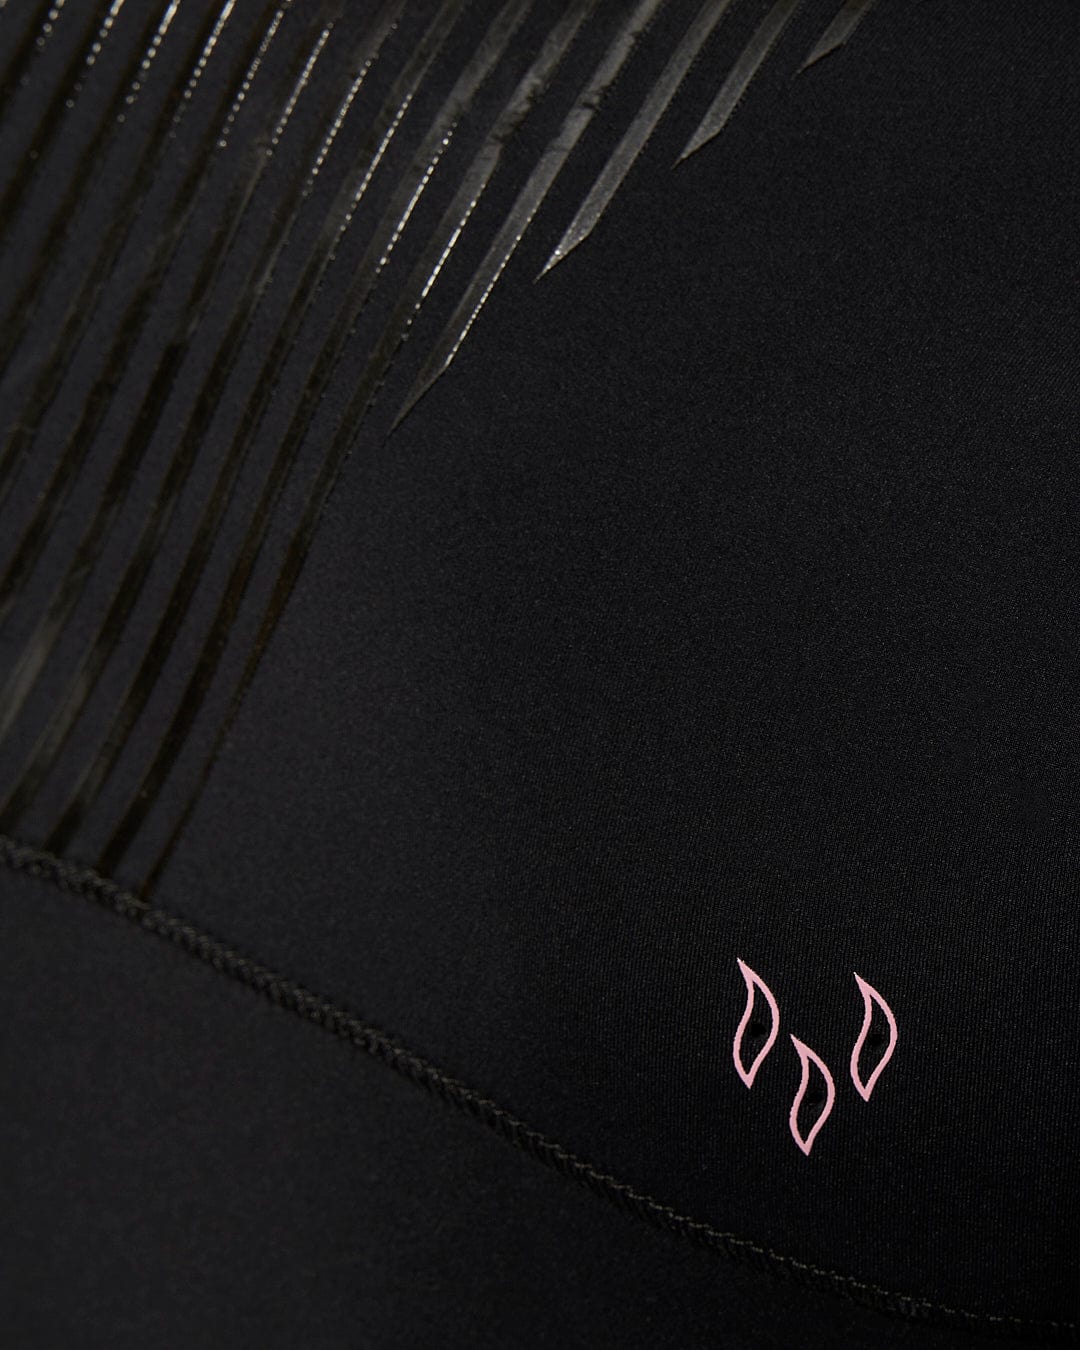 A close up of a Saltrock Shockwave - Womens 3/2 Front Zip Full Wetsuit - Black with a pink logo.